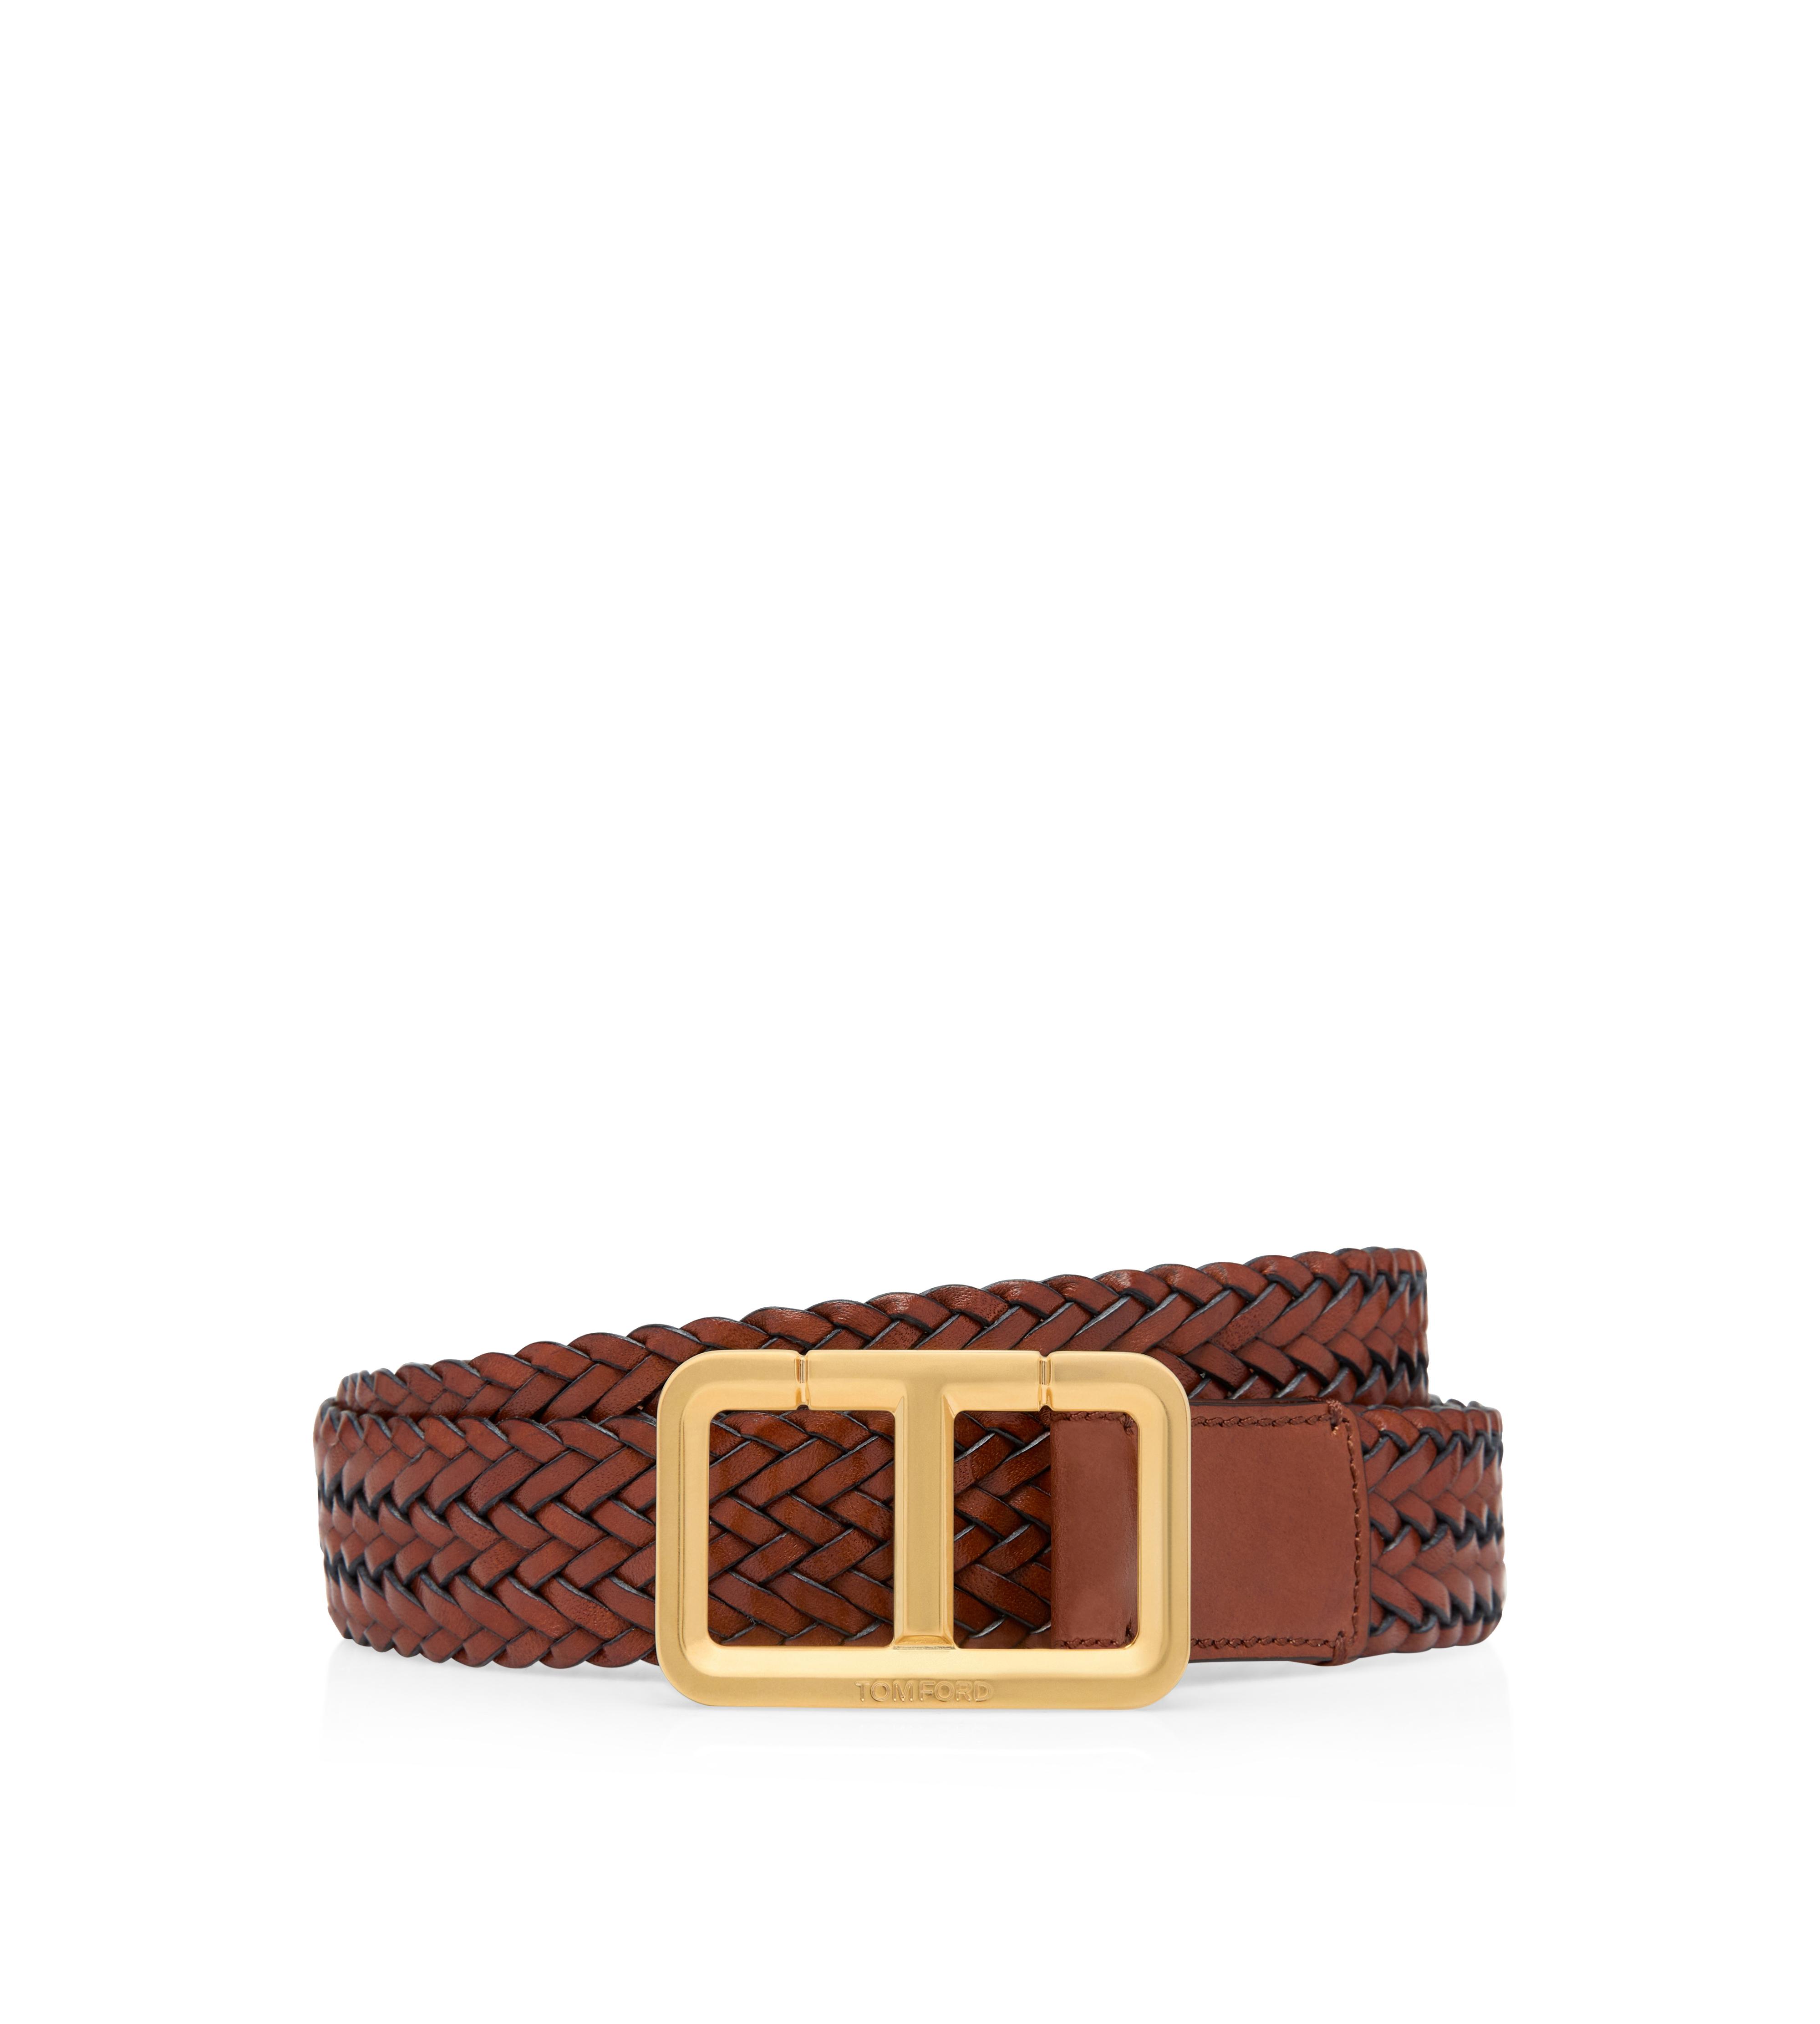 Buy online Lv Check Belts For Him With Brand Box In Pakistan